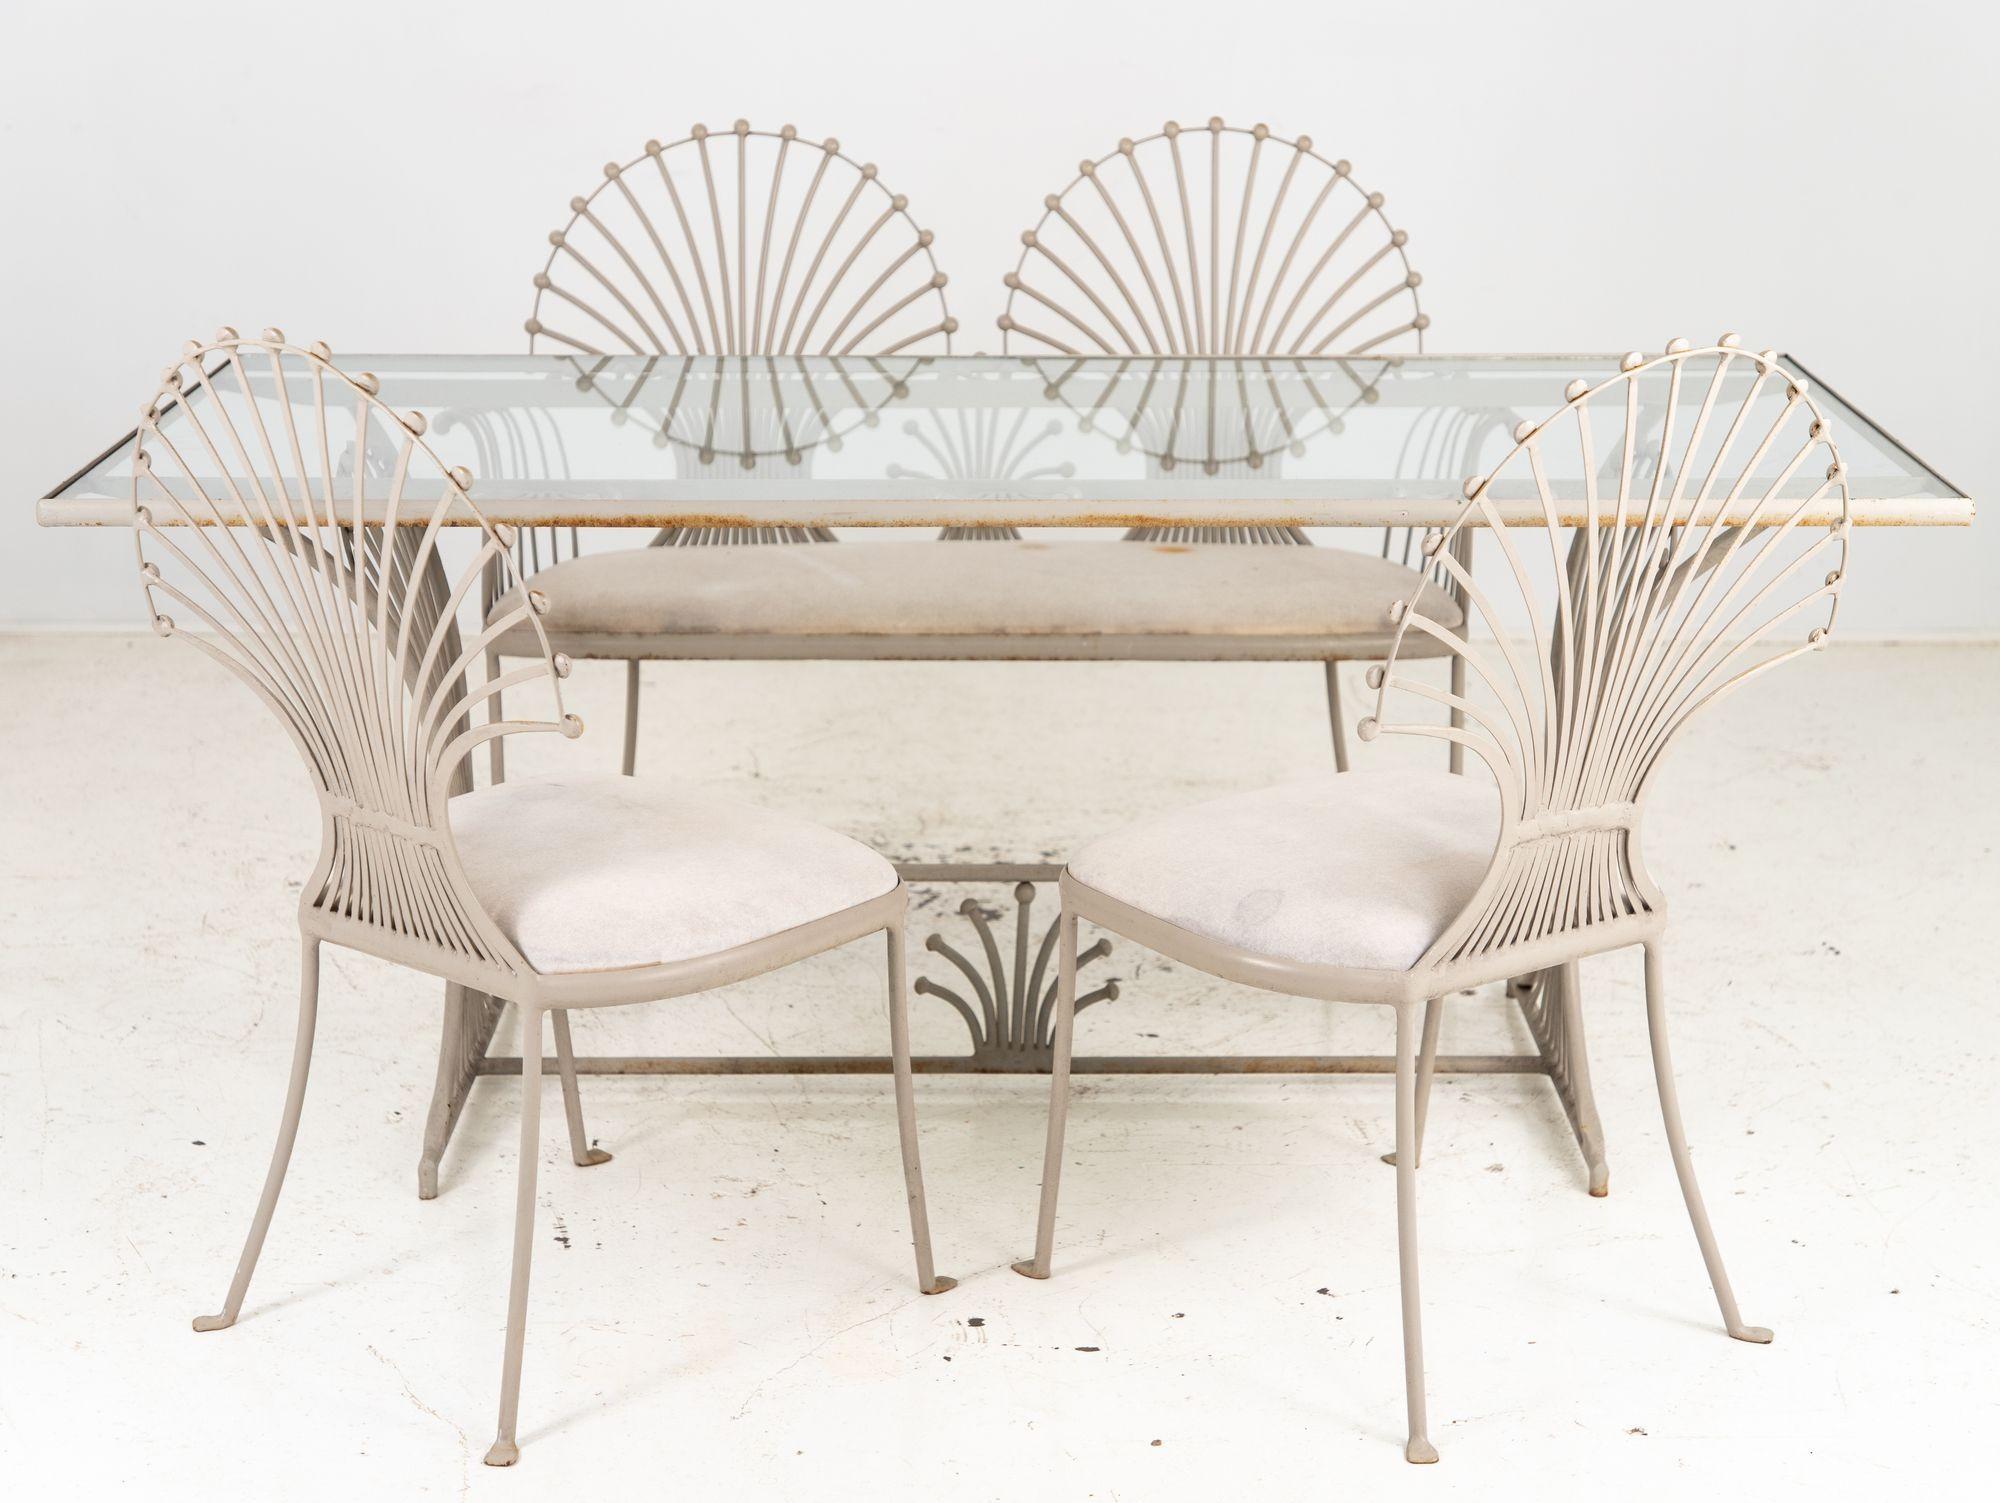 Elevate your dining experience with this exquisite armchair adorned with a stunning Peacock or wheat sheaf motif, crafted in gray painted aluminum for a contemporary touch. Inspired by Leinfelder wheat sheaf garden table. A set is available,